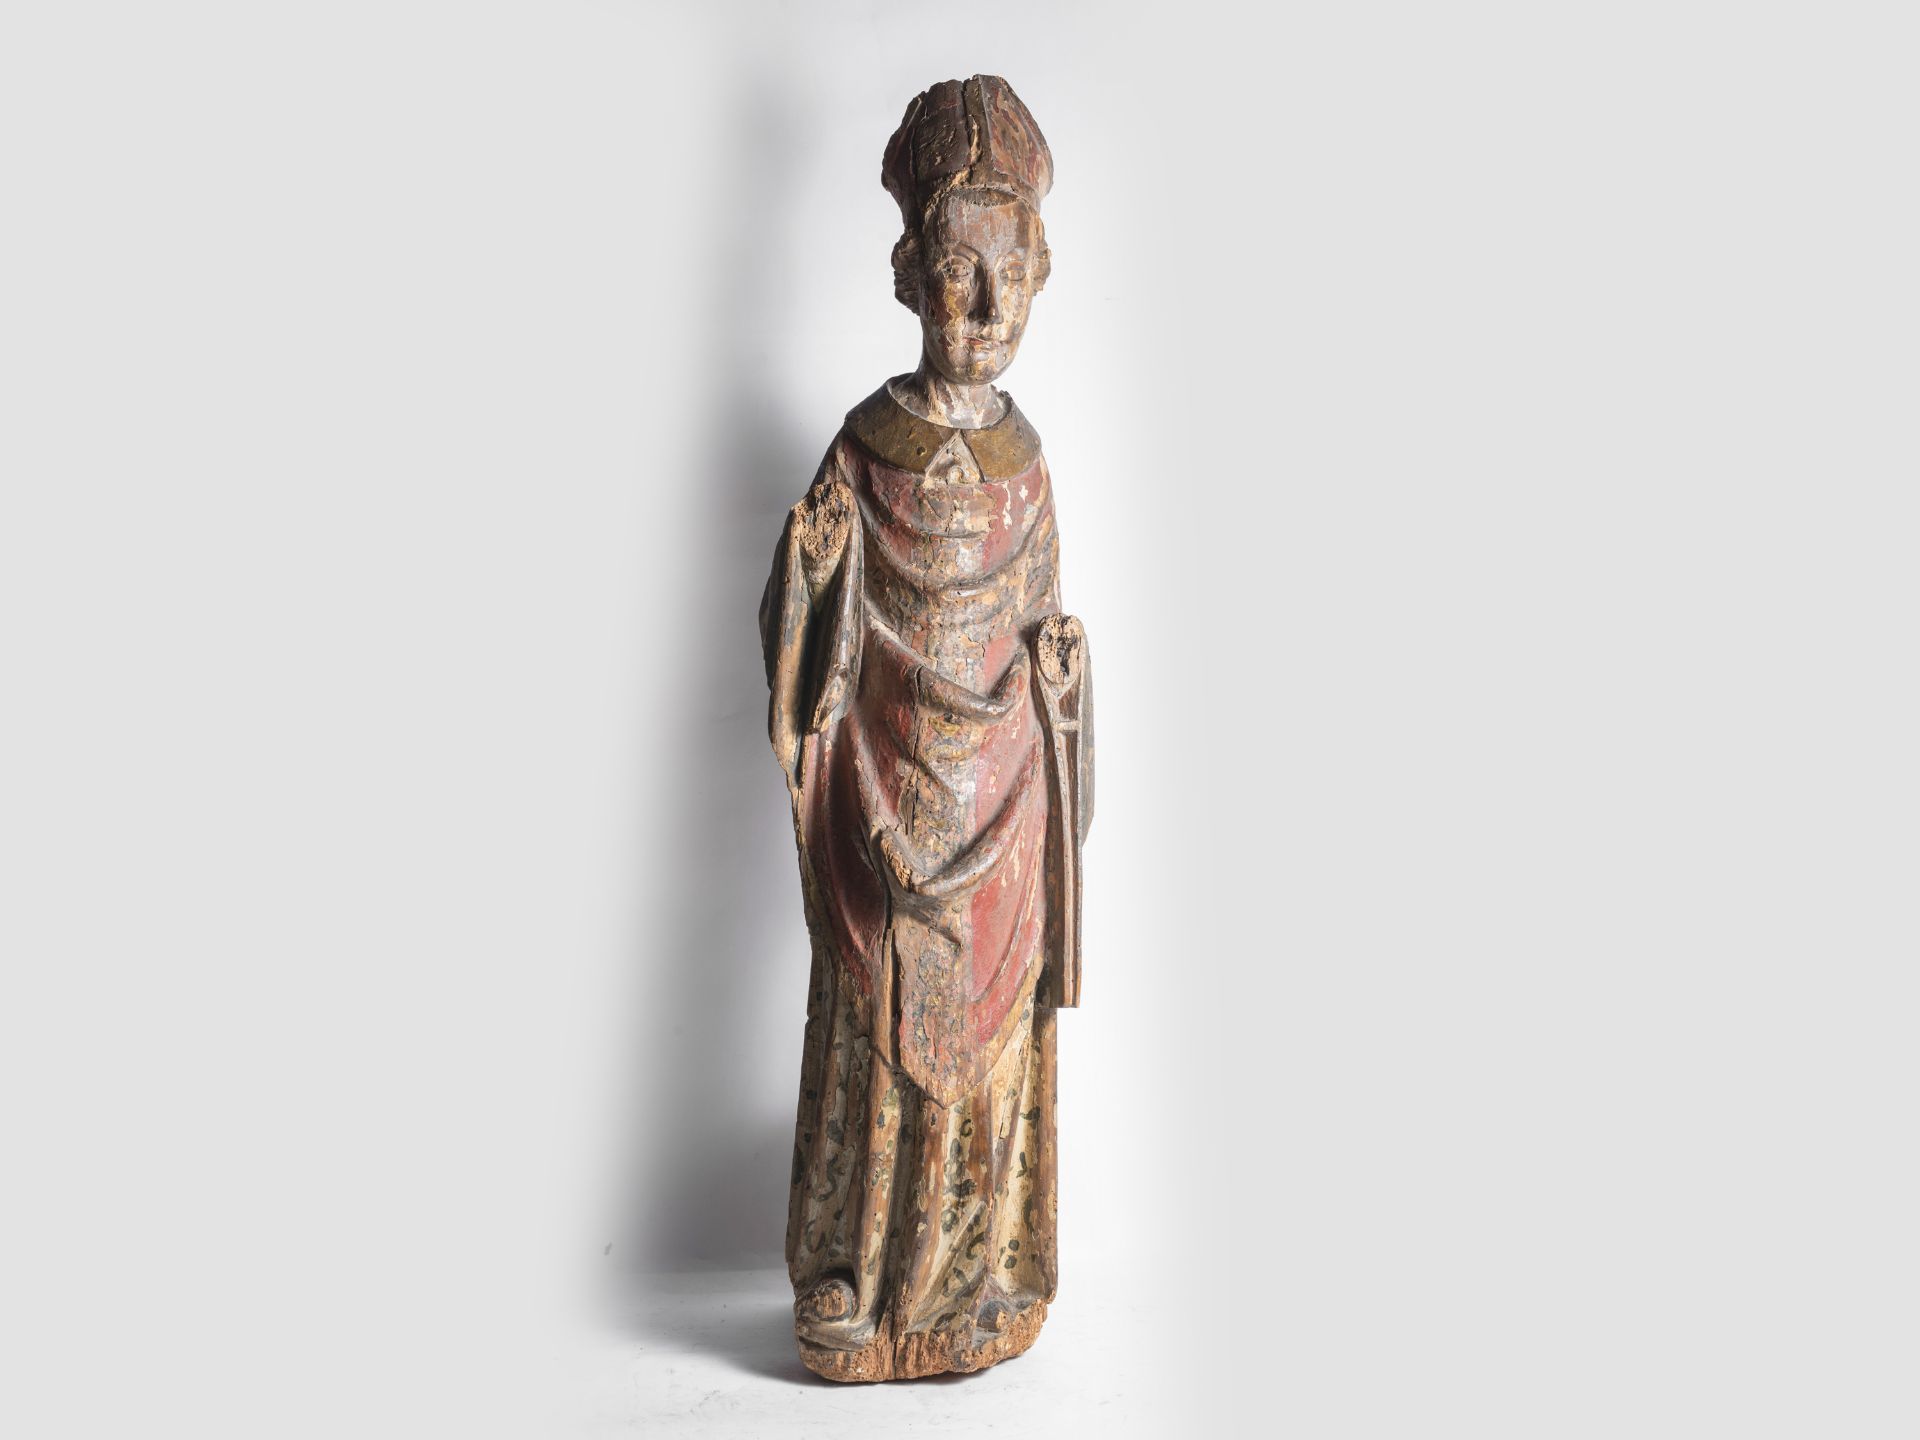 Hl. Bishop in Soft Style, Tyrol around 1400, Carved lime wood